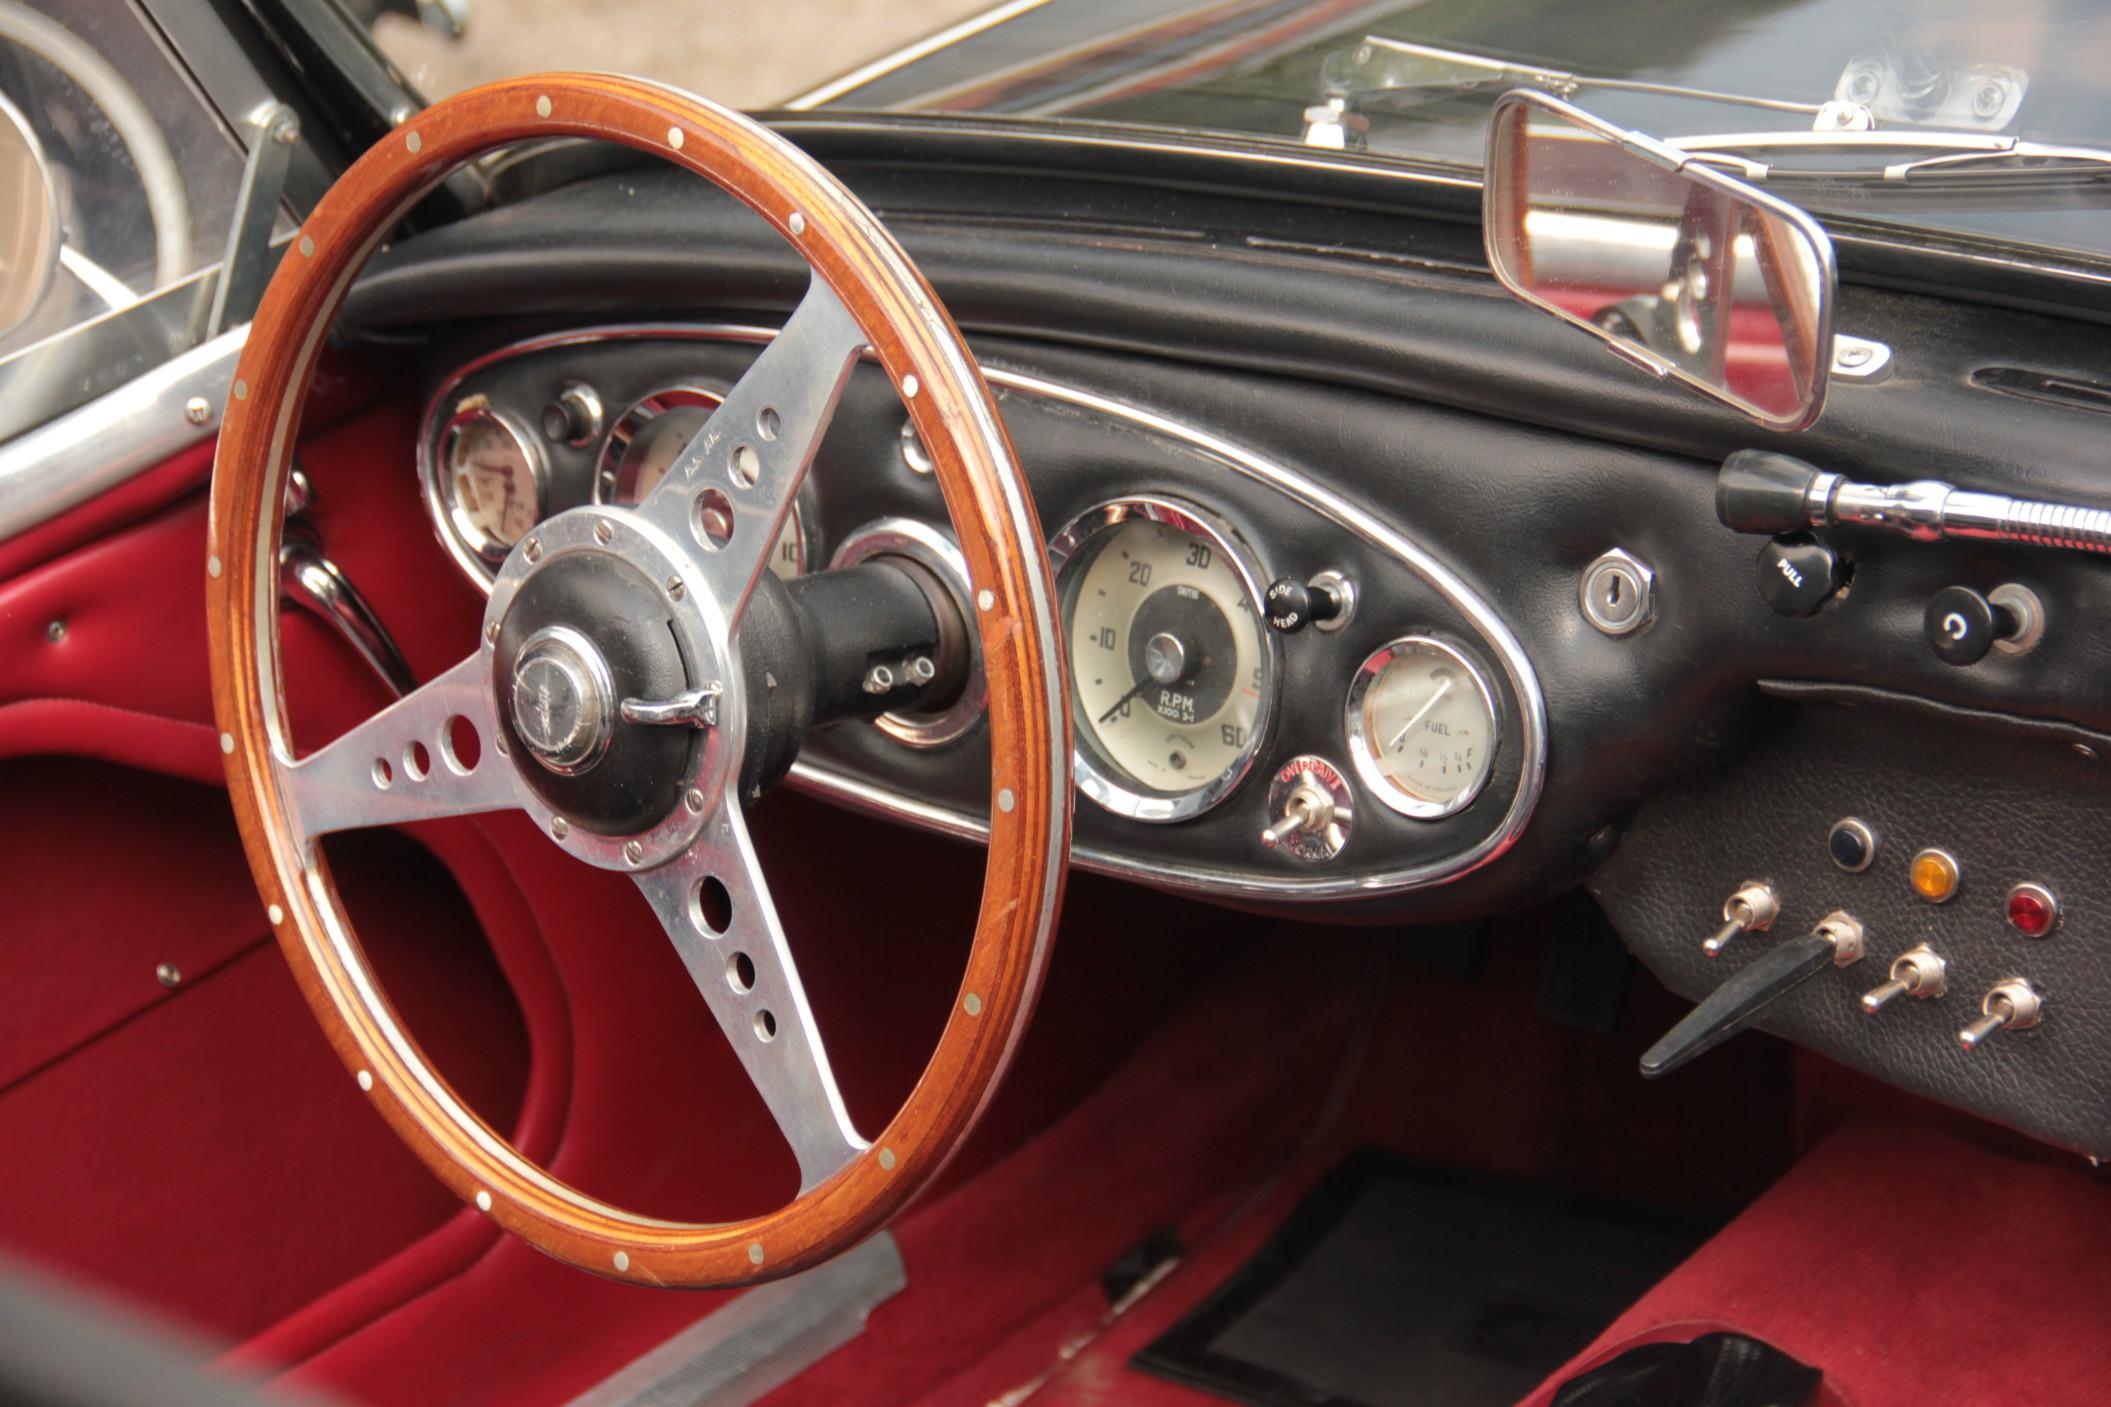 The thin brown steering wheel of a classic car with a red and black interior.